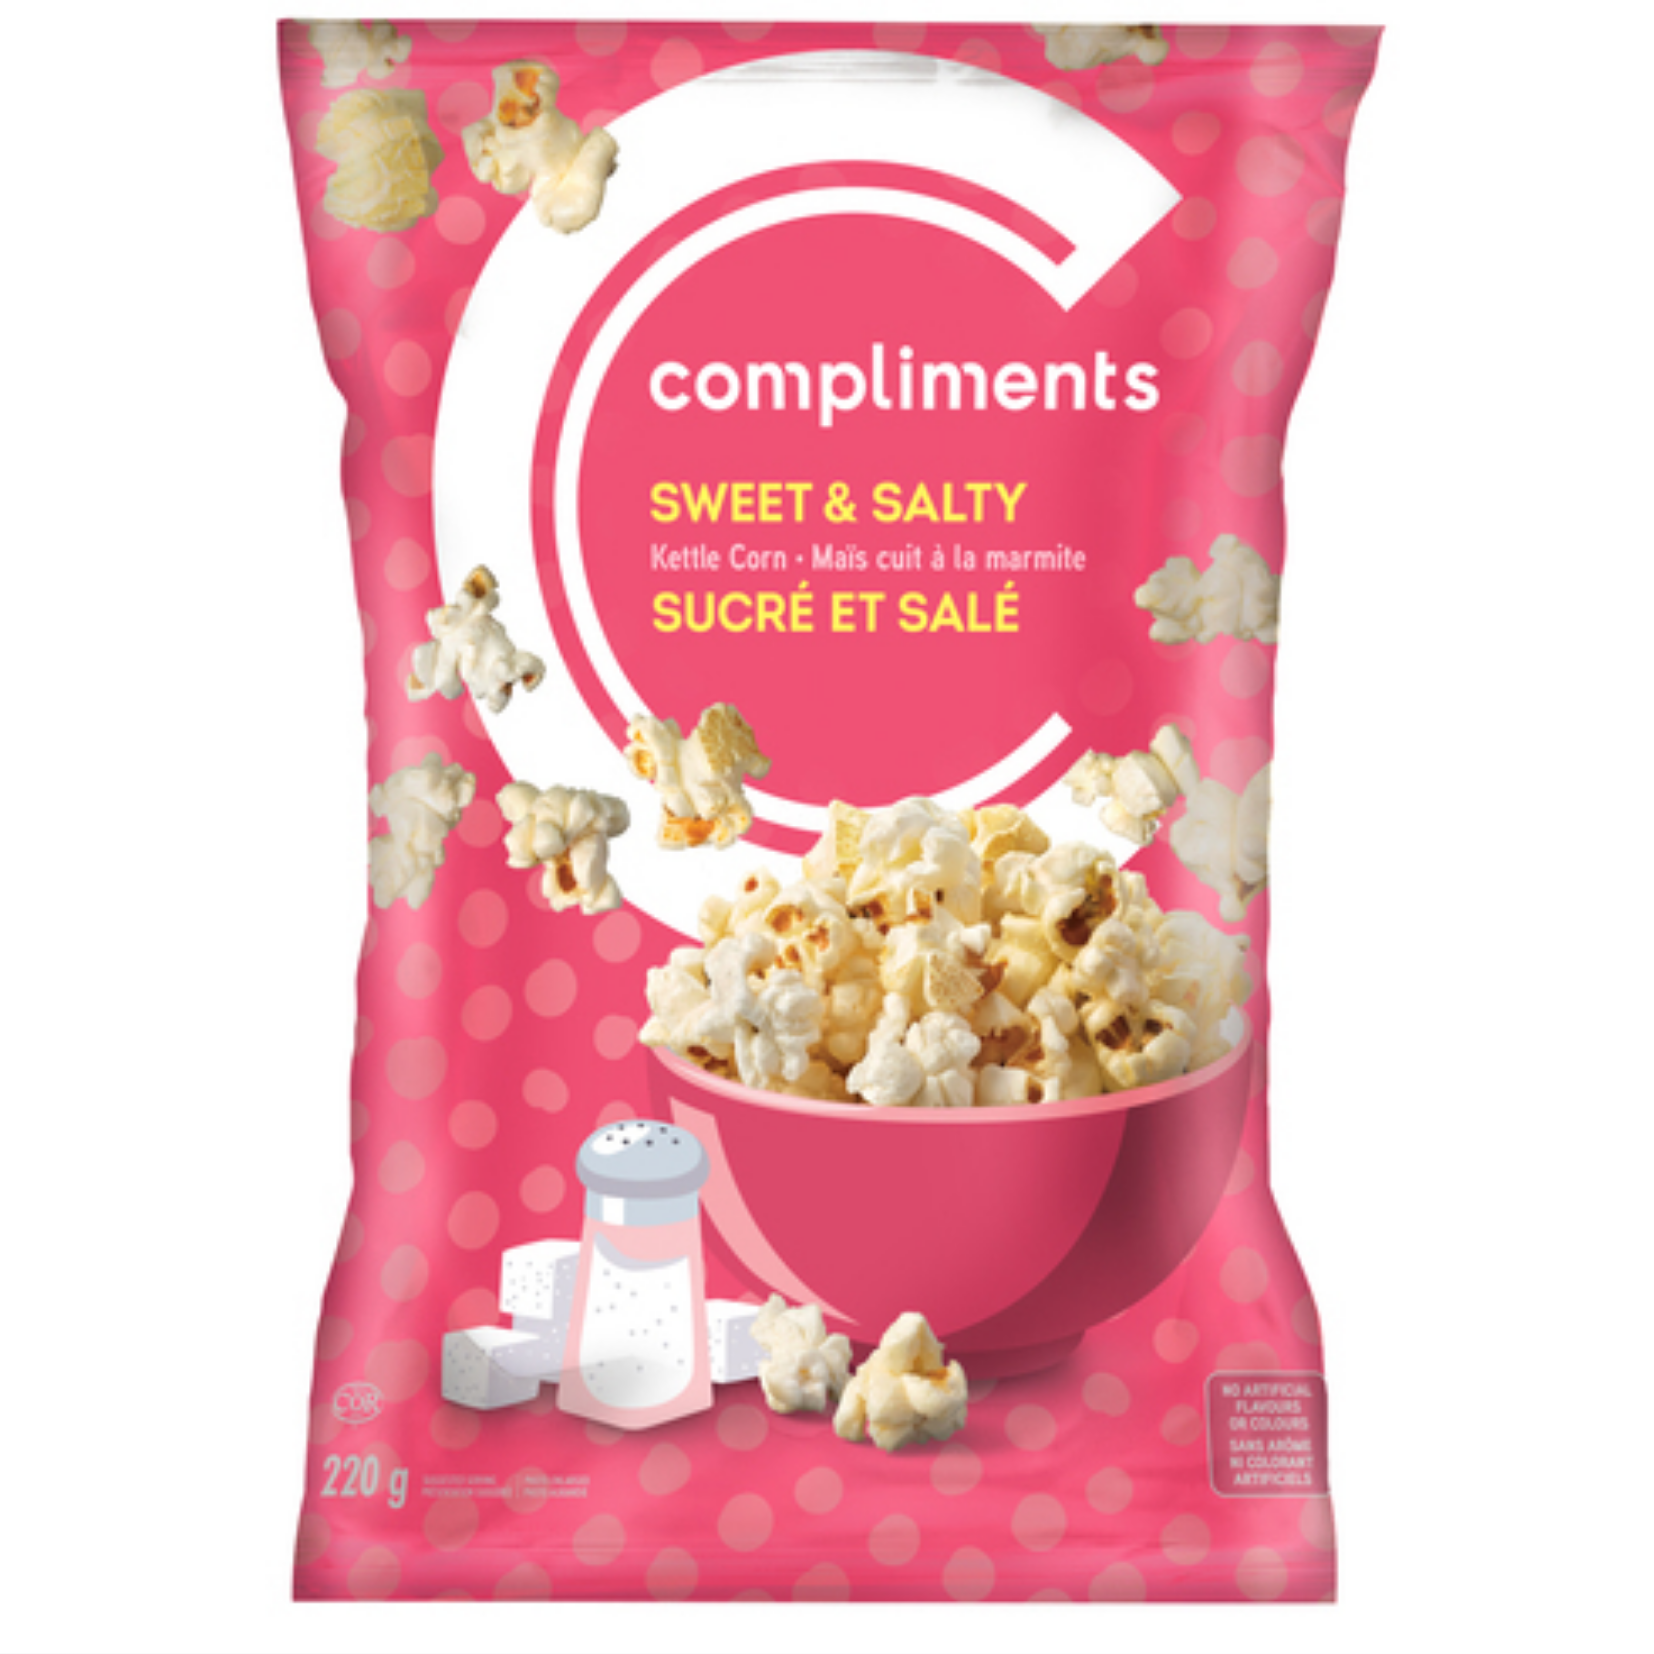 Compliments Sweet & Salty Kettle Corn 225g